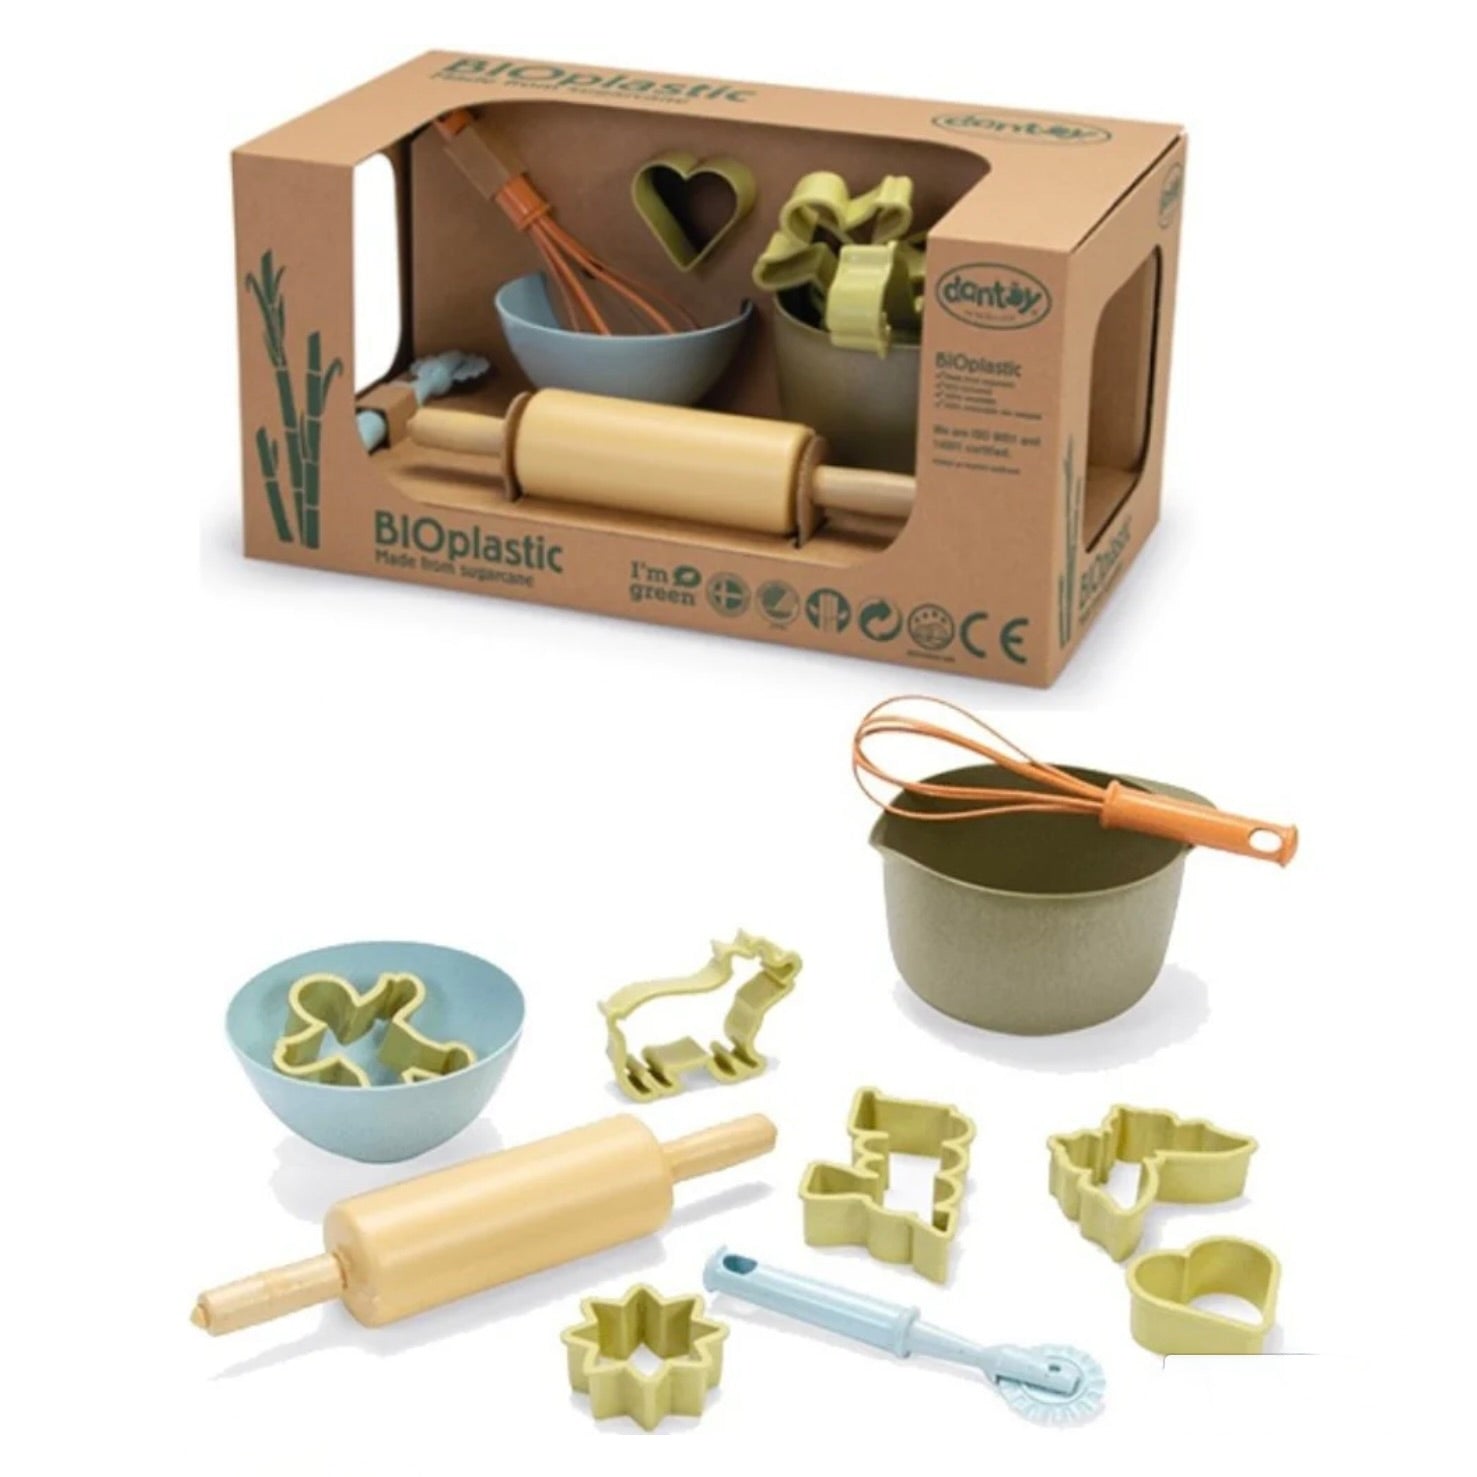 Bakeware and Baking Gifts